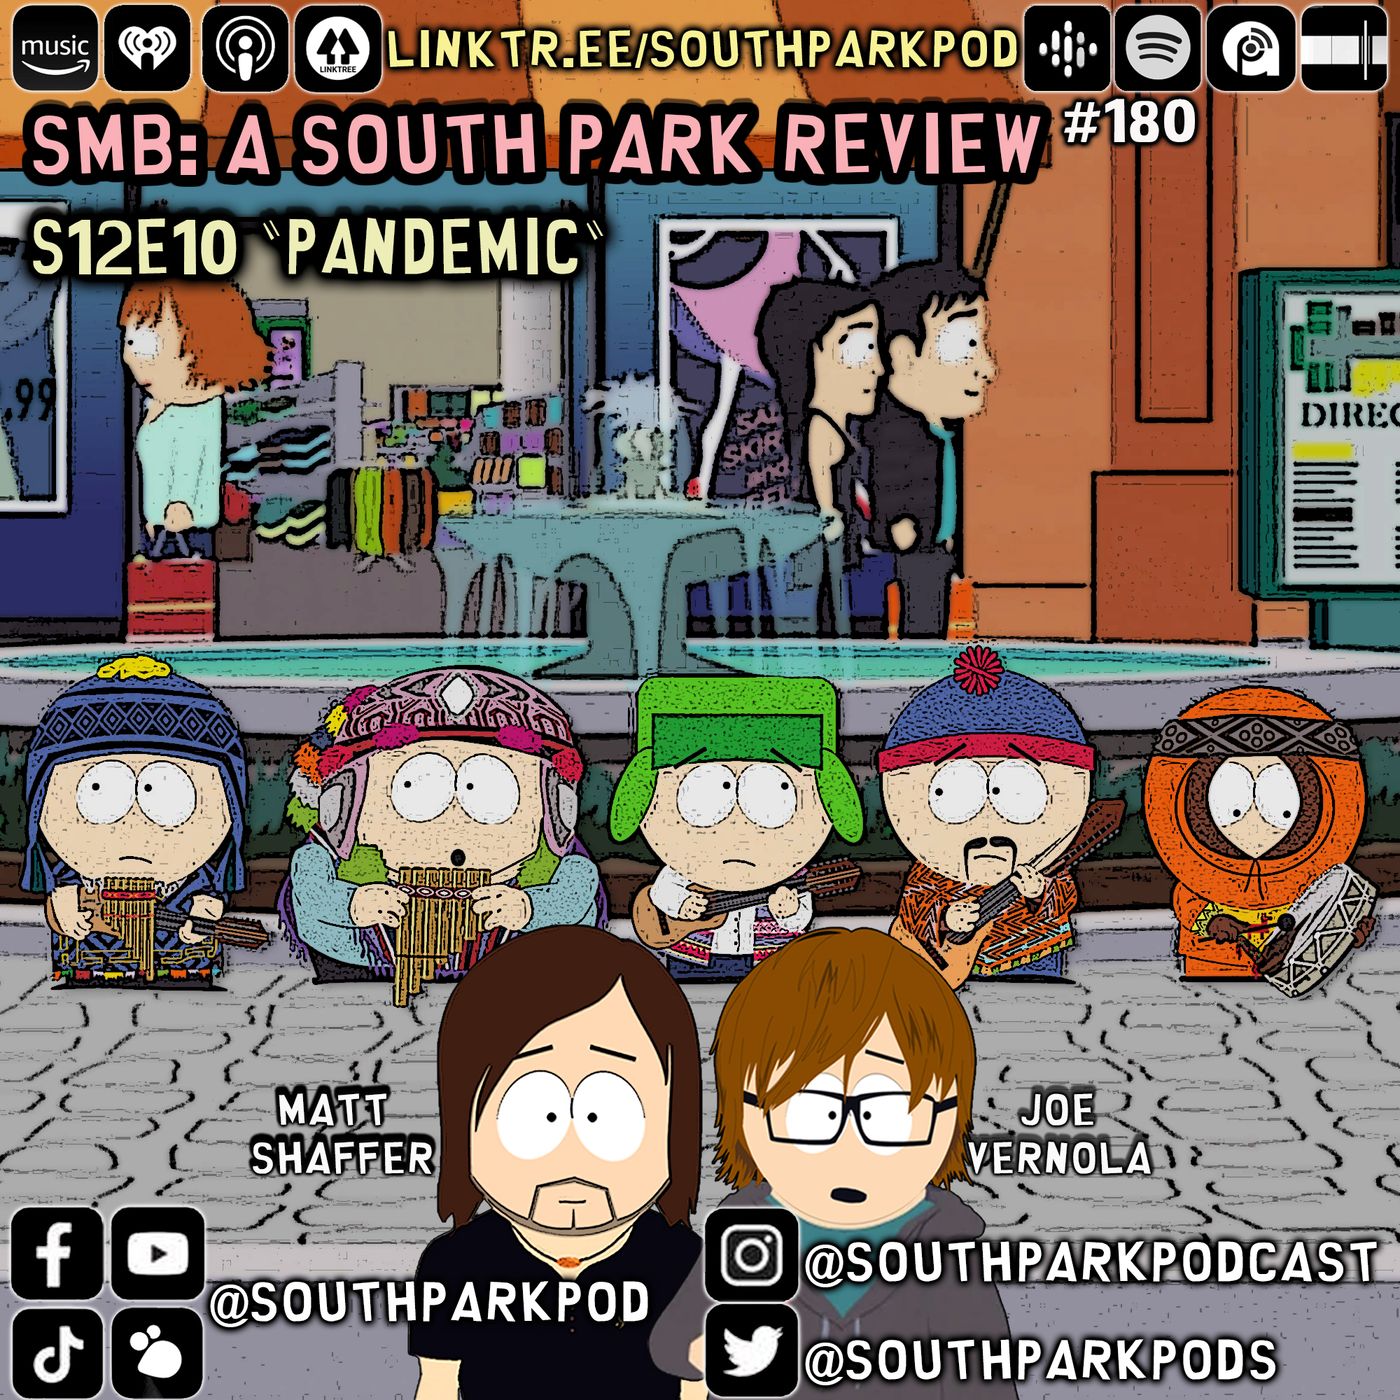 SMB #180 - S12E10 Pandemic - ”Come On In Craig. Have A Seat.”